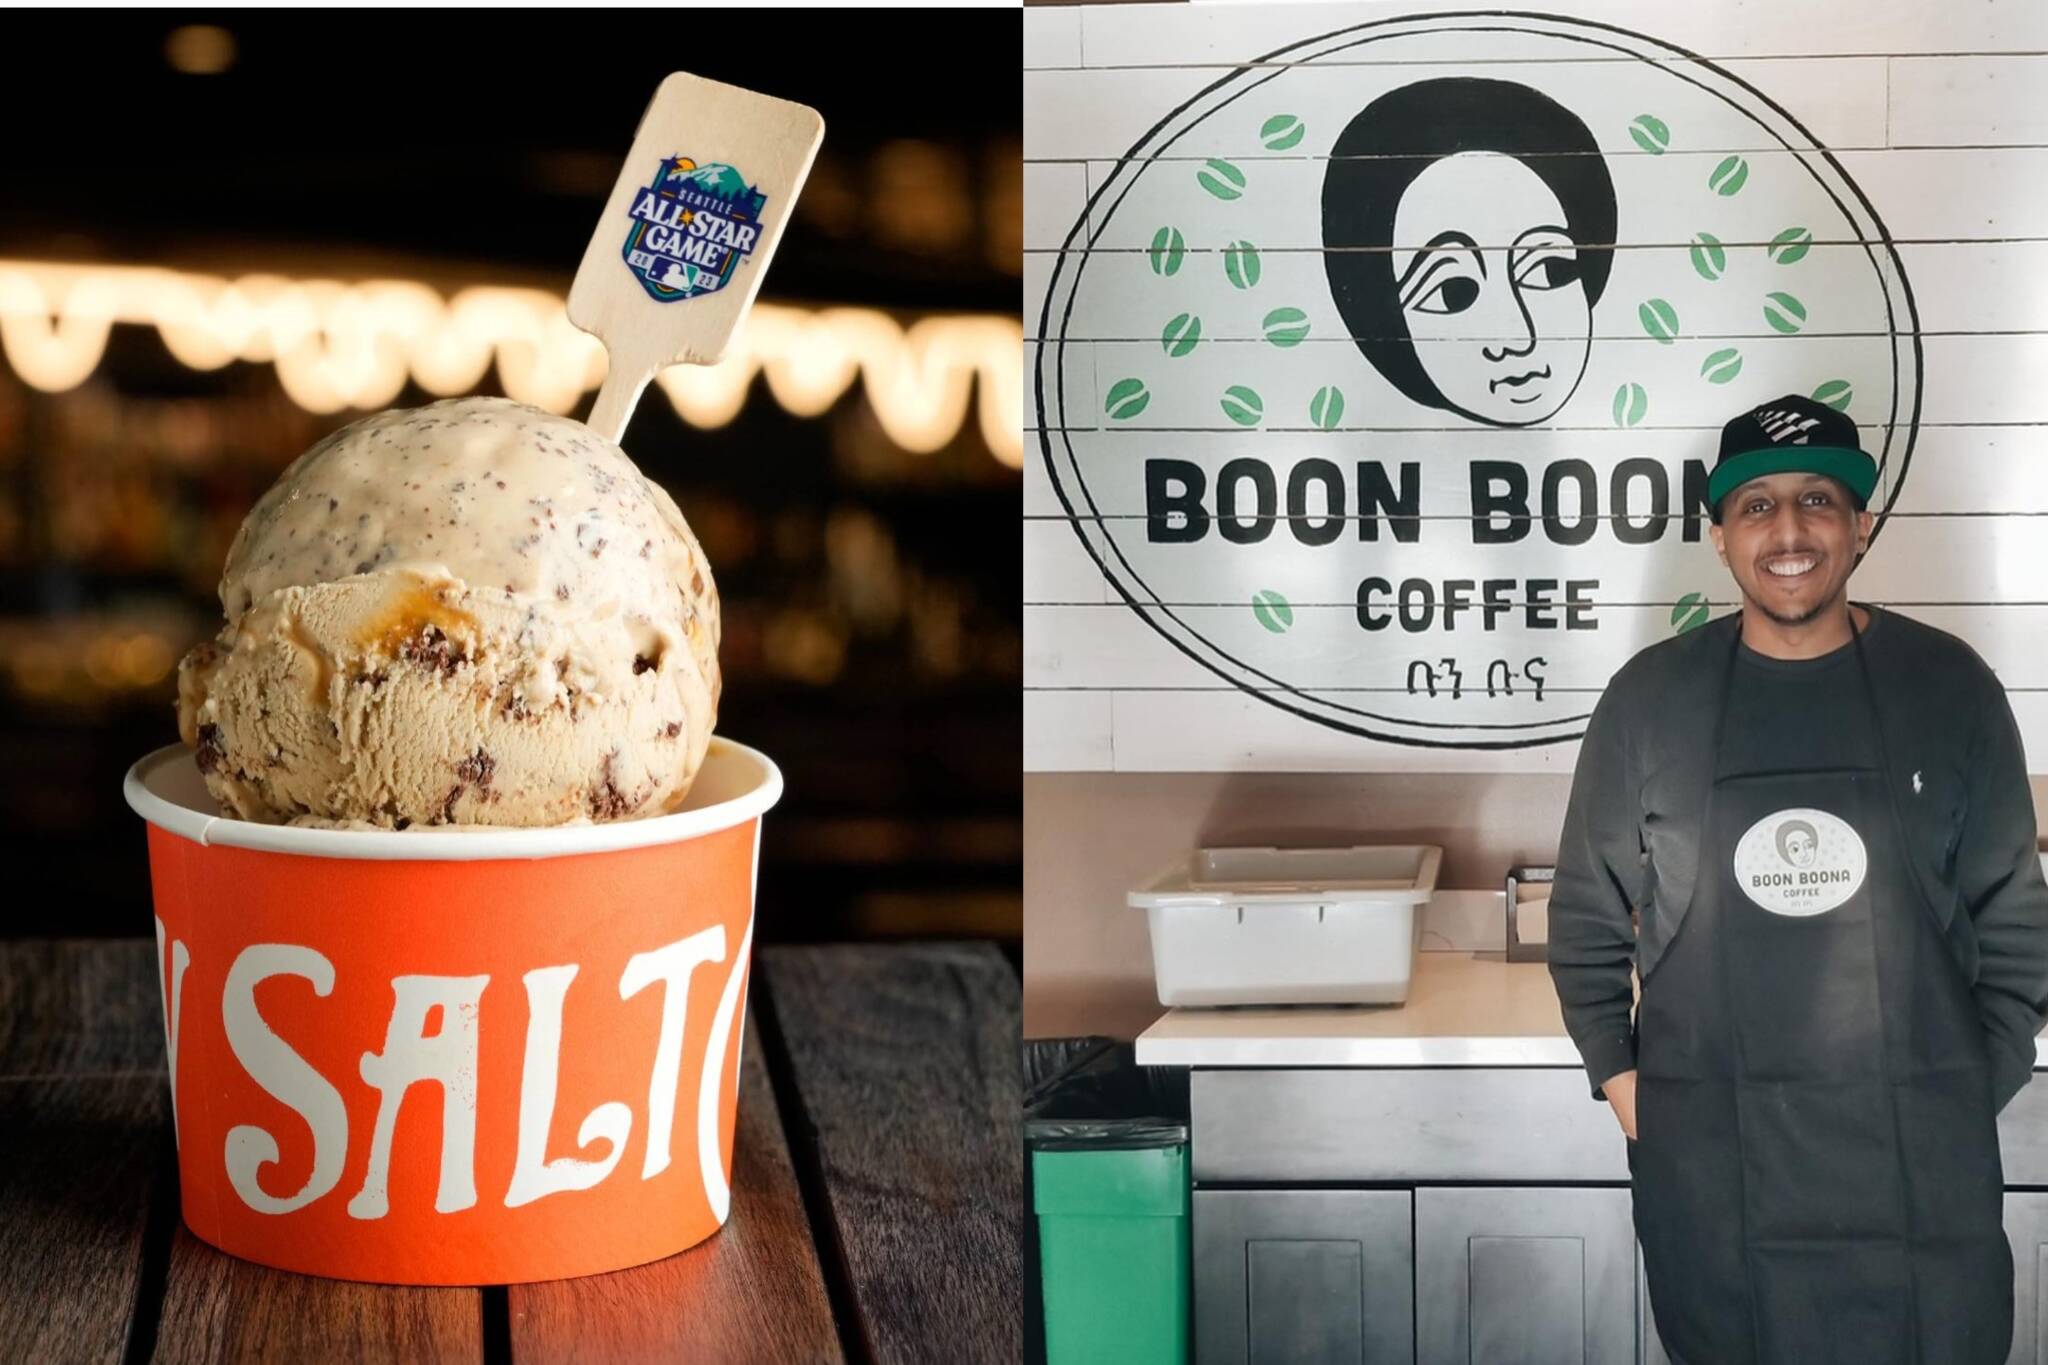 Photos courtesy of Salt & Star and Boon Boona.
Boon Boona coffee was used for Salt & Straw’s special All-Star Game ice cream at T-Mobile Park.